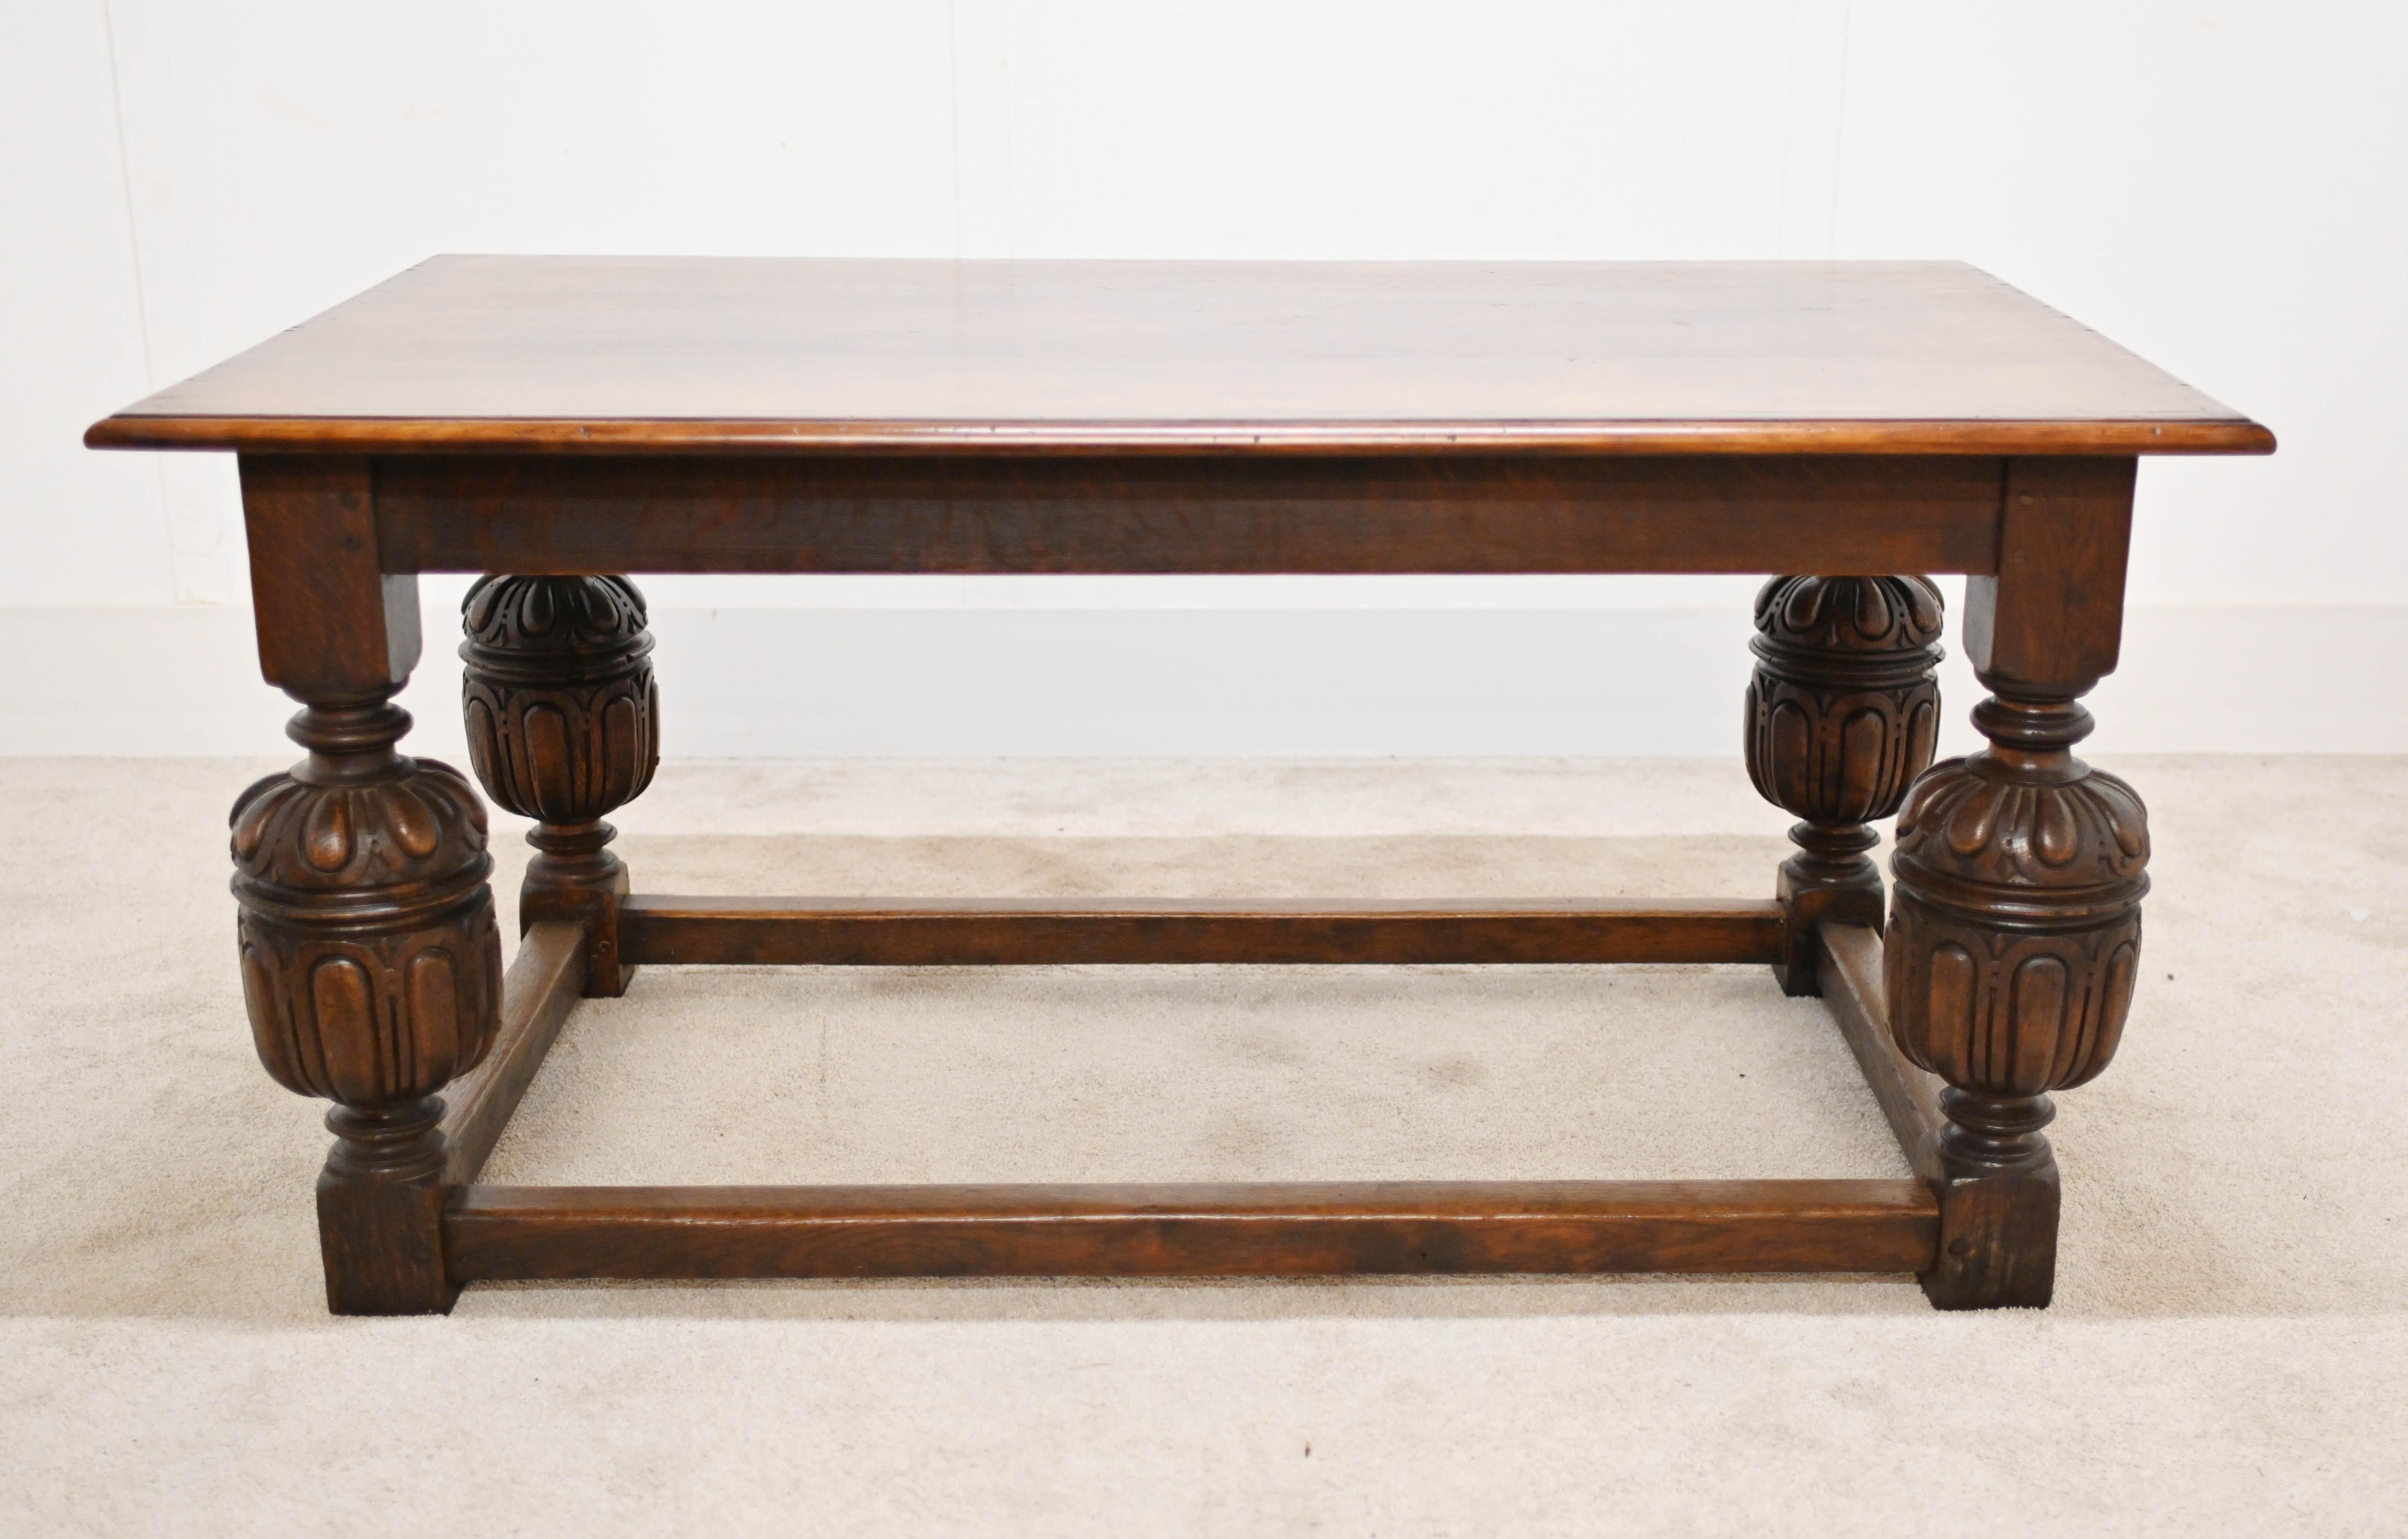 Oak Tudor style centre/serving table with carved bulbous legs 
Could almost function as a small refectory table also
Great farmhouse look with the oak and detailed carving
Circa 1880
Offered in great condition ready for home use right away
Will ship